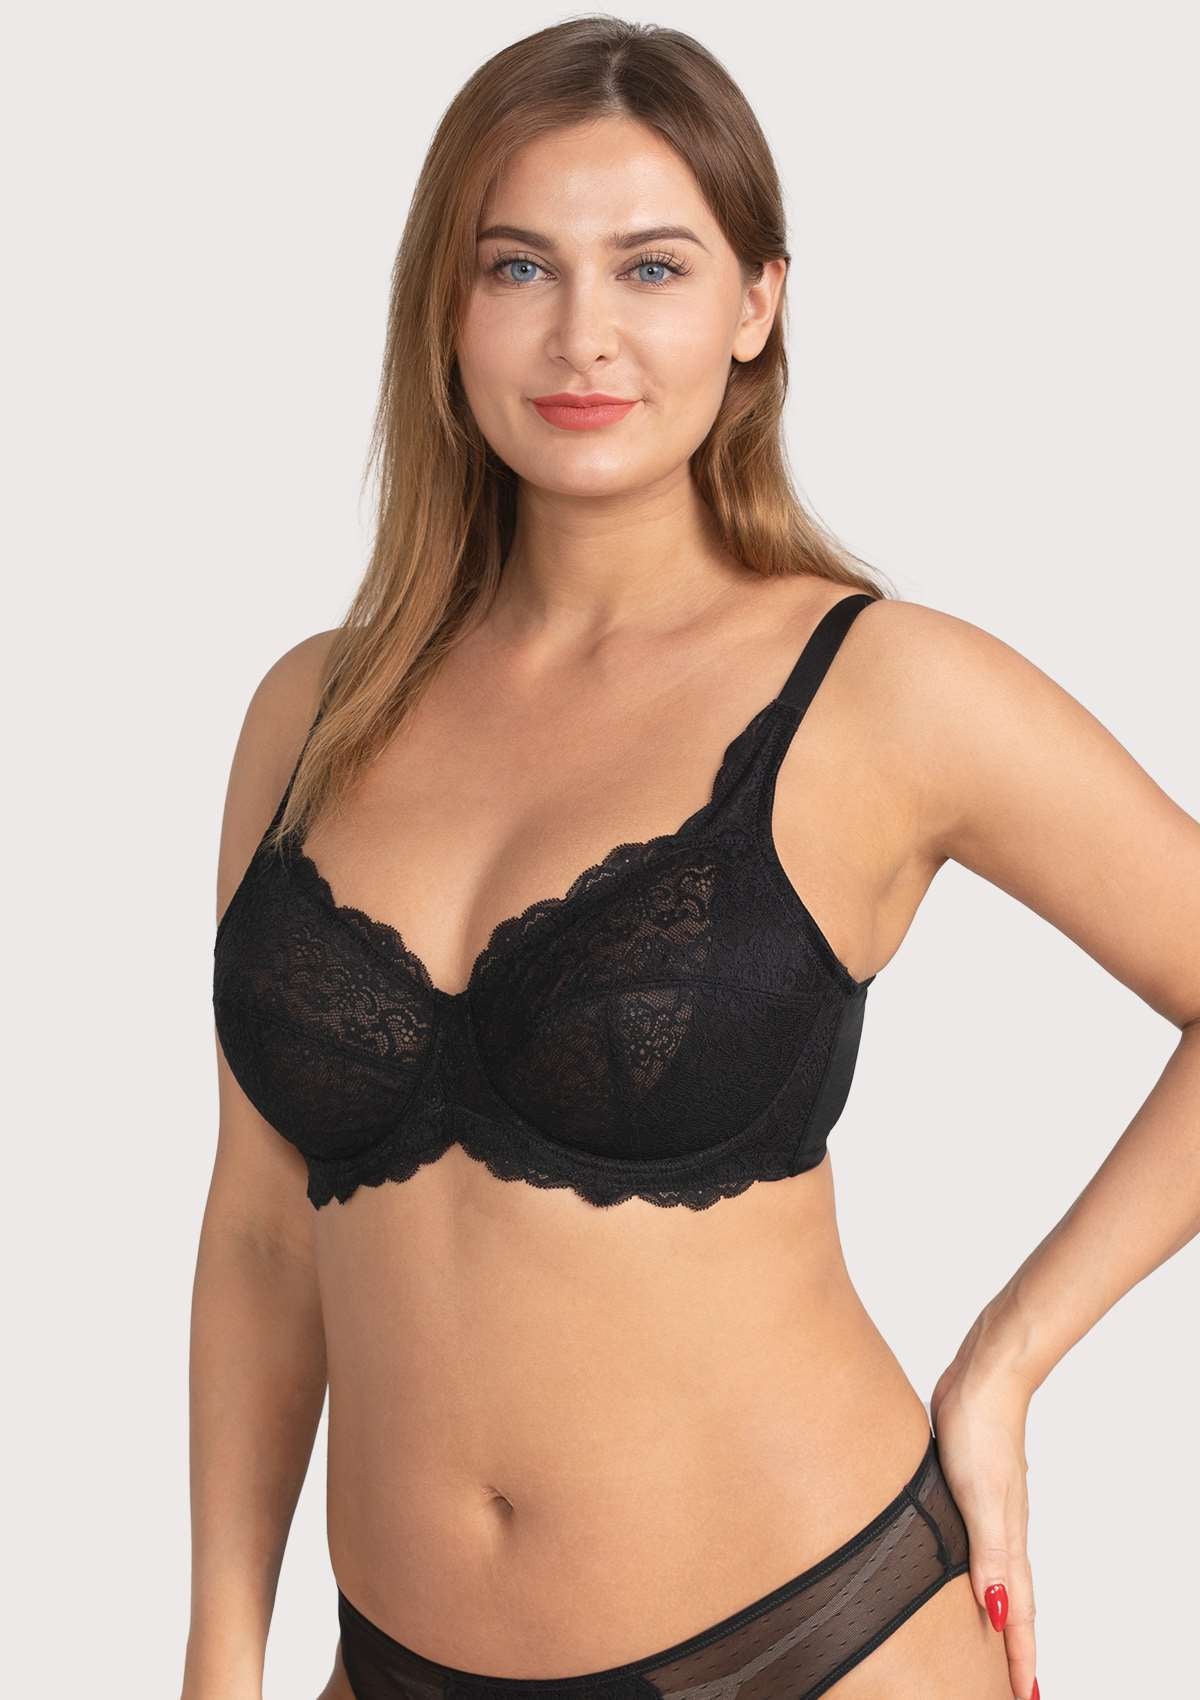 HSIA All-Over Floral Lace Unlined Bra: Minimizer Bra For Heavy Breasts - Dark Green / 40 / D